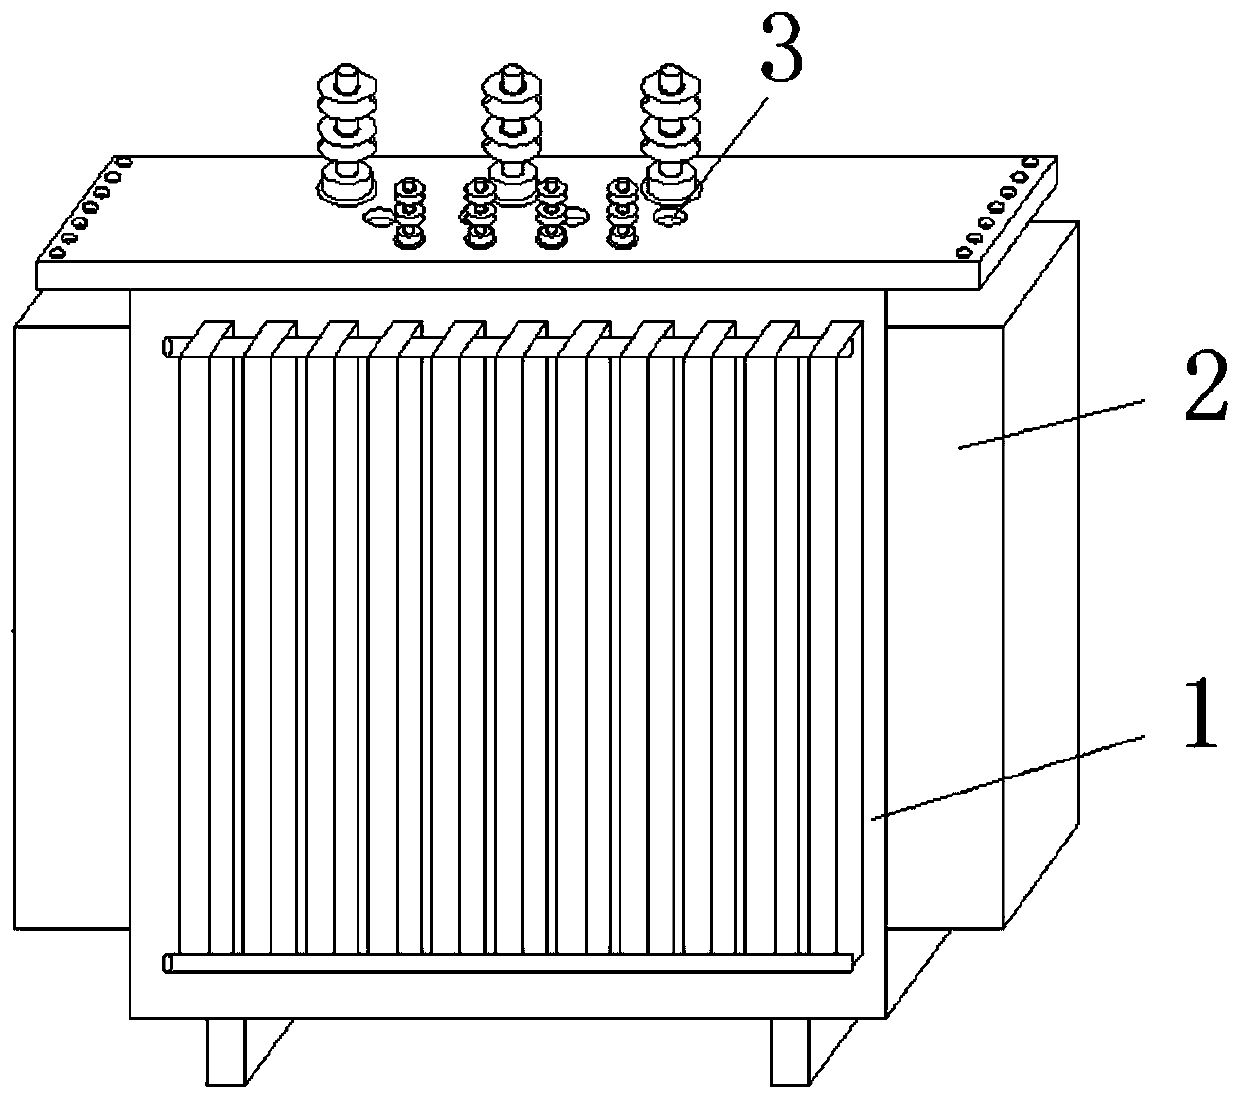 Emergency treatment device with dry-type transformer internal fire